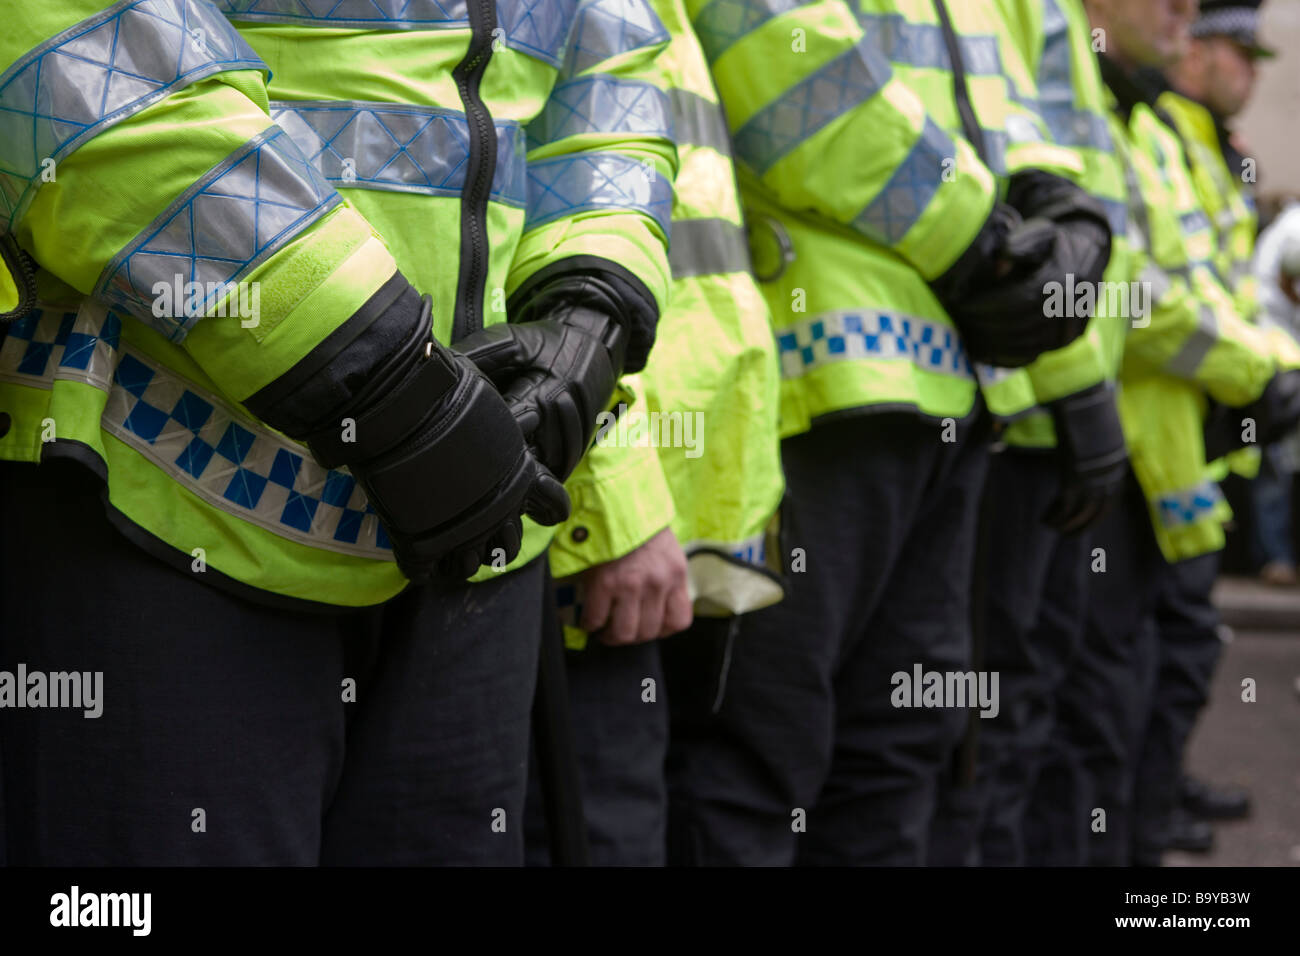 Police line during anti-capitalist protest against G20 summit in London, April 1 2009 Stock Photo